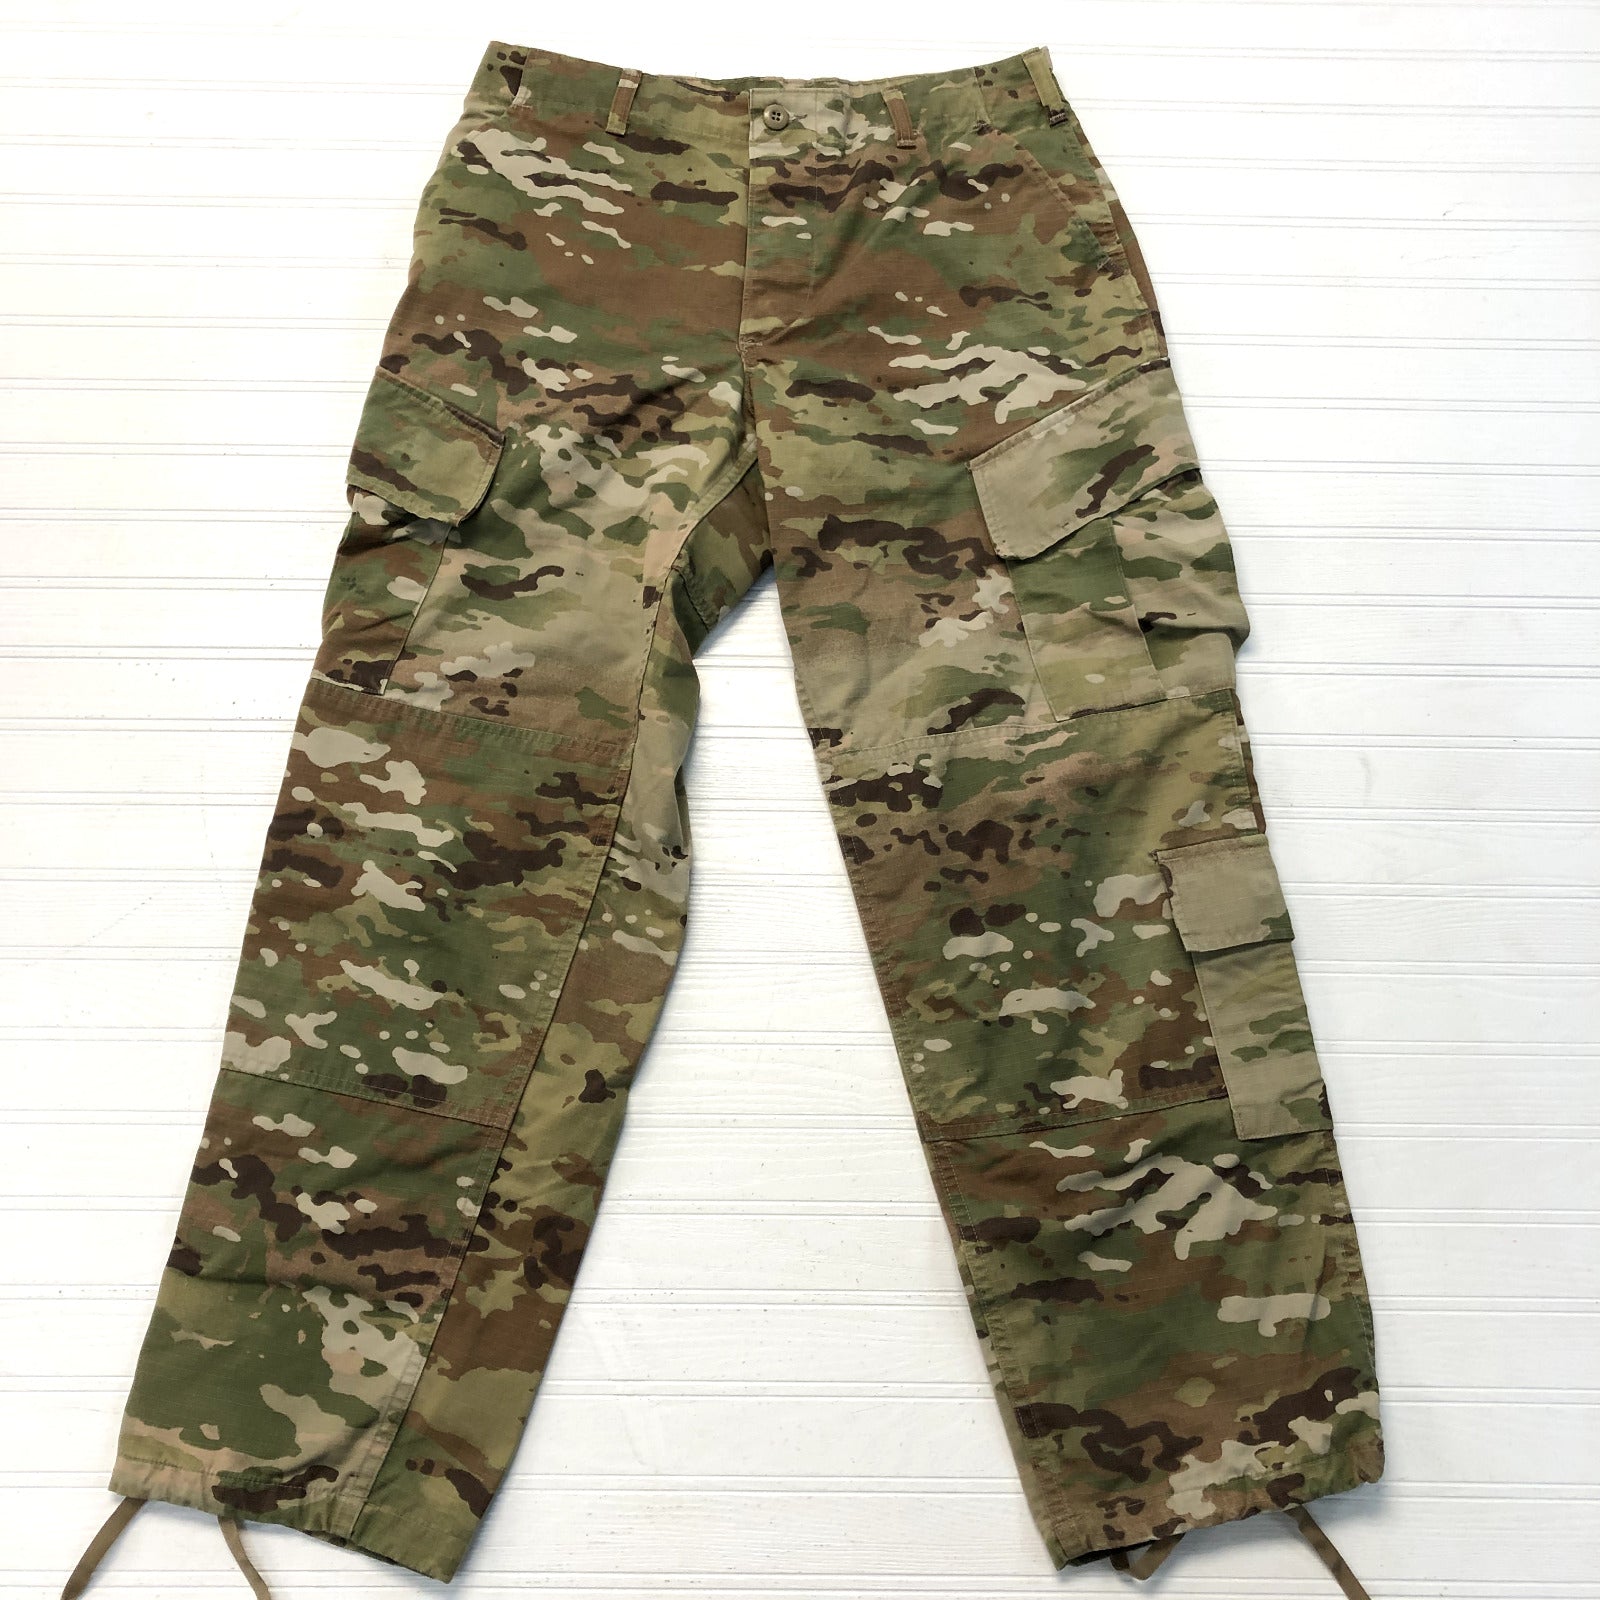 Vintage Military Camouflage Army Combat Trouser Pants Adult Size 32"W x 30"L